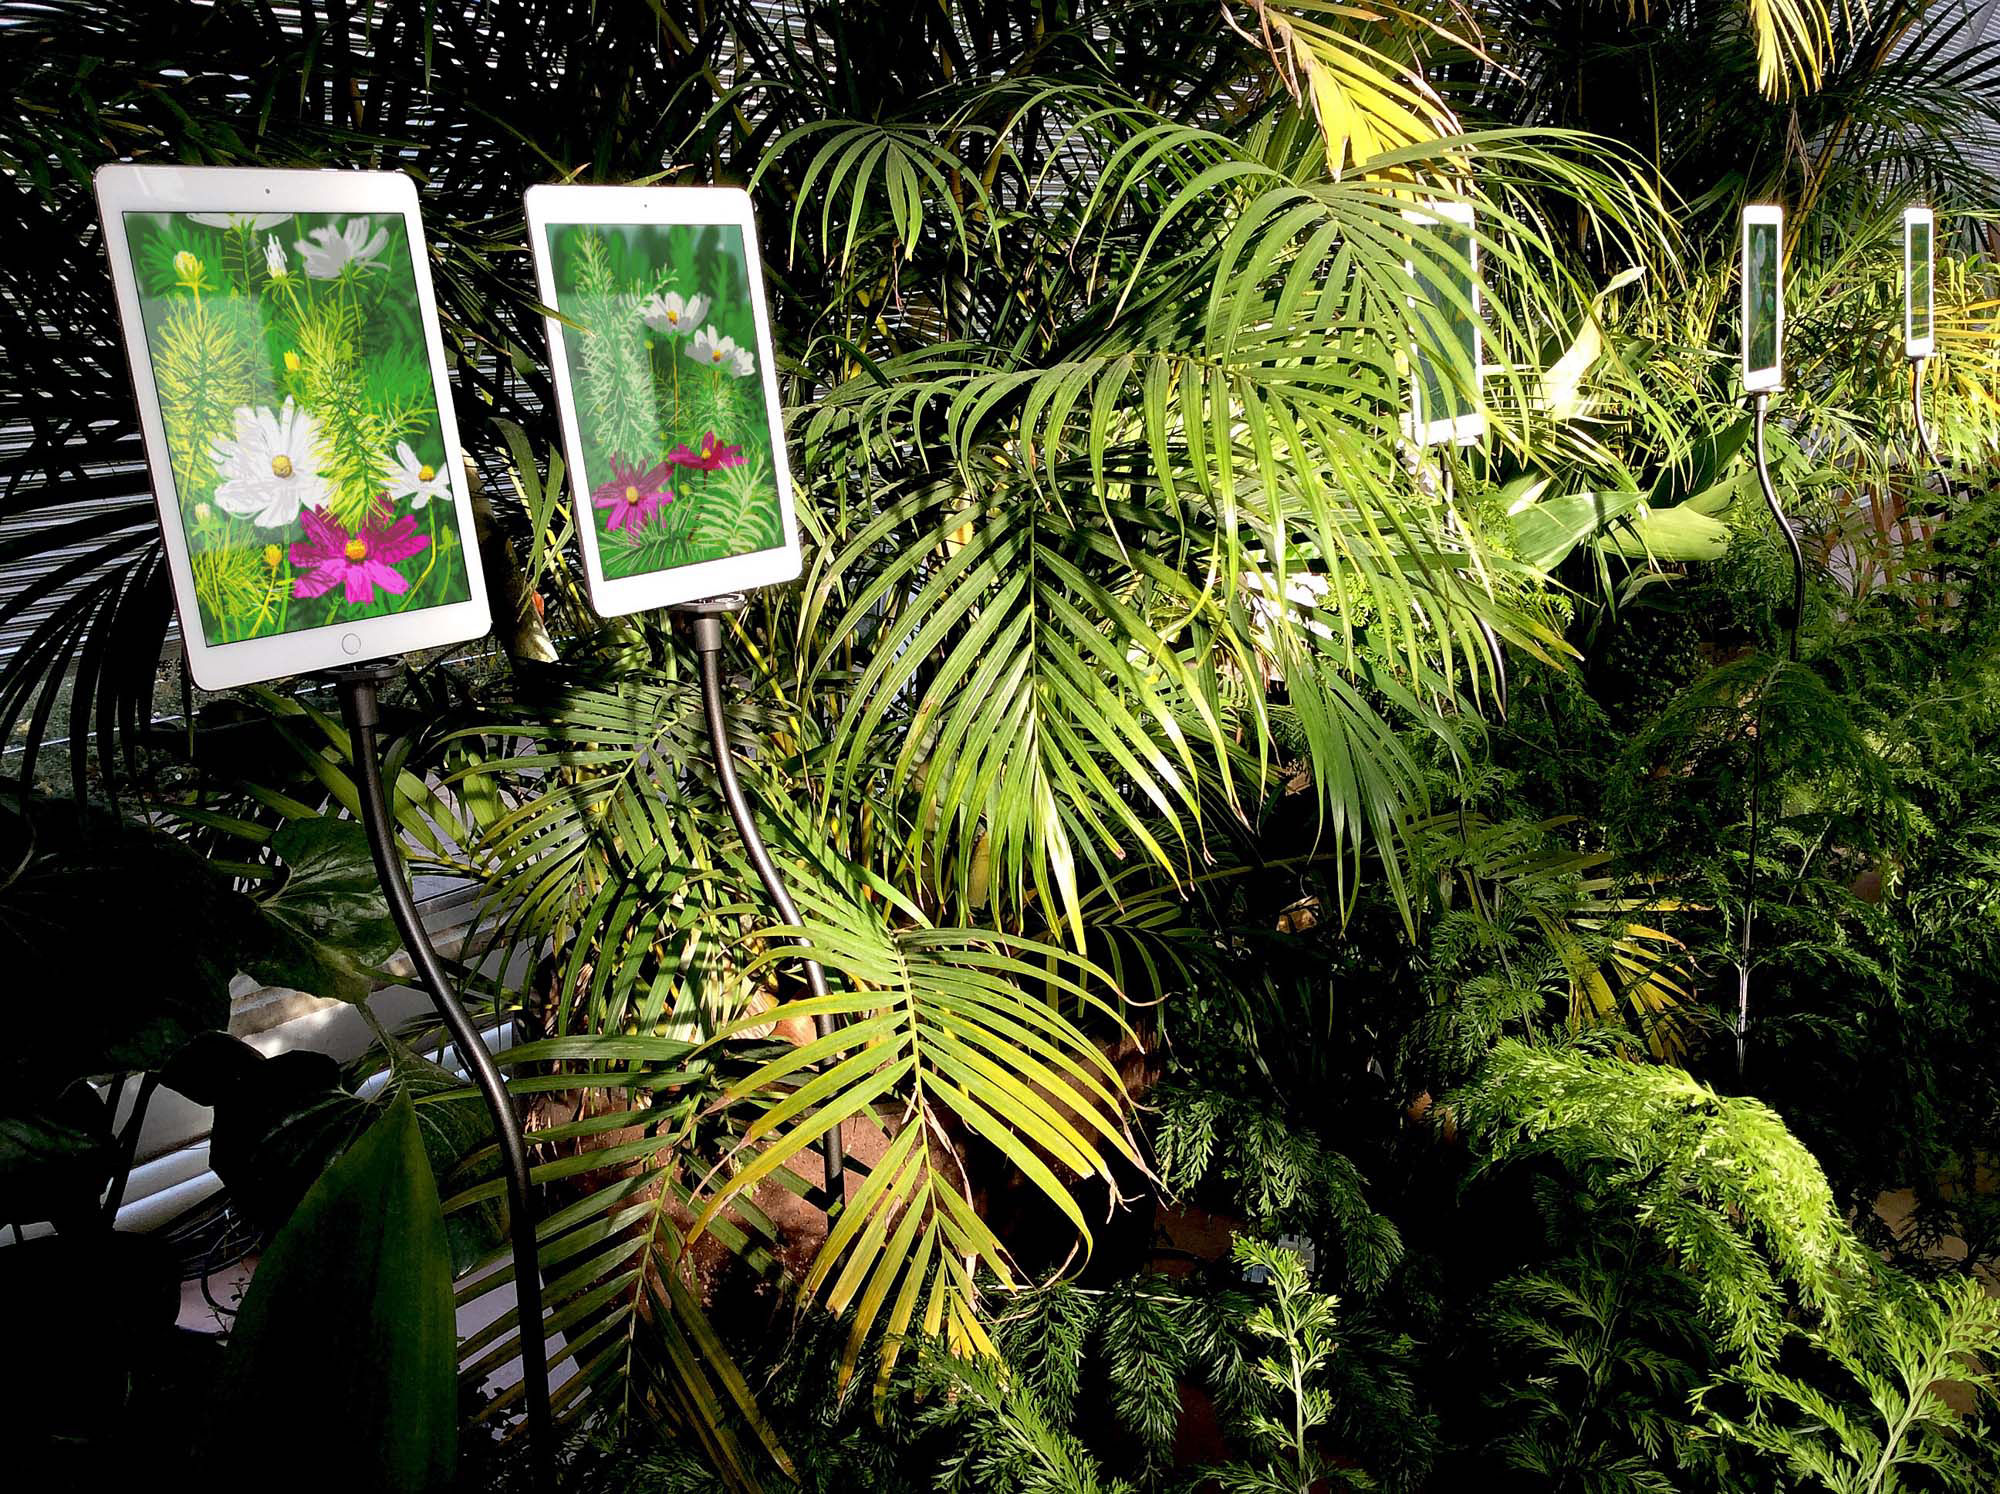 Andy Maitland, Collaboration, 2019, The Digital Garden® 2019 installation, animated iPad drawings at the Royal Horticultural Society garden Wisley, UK.